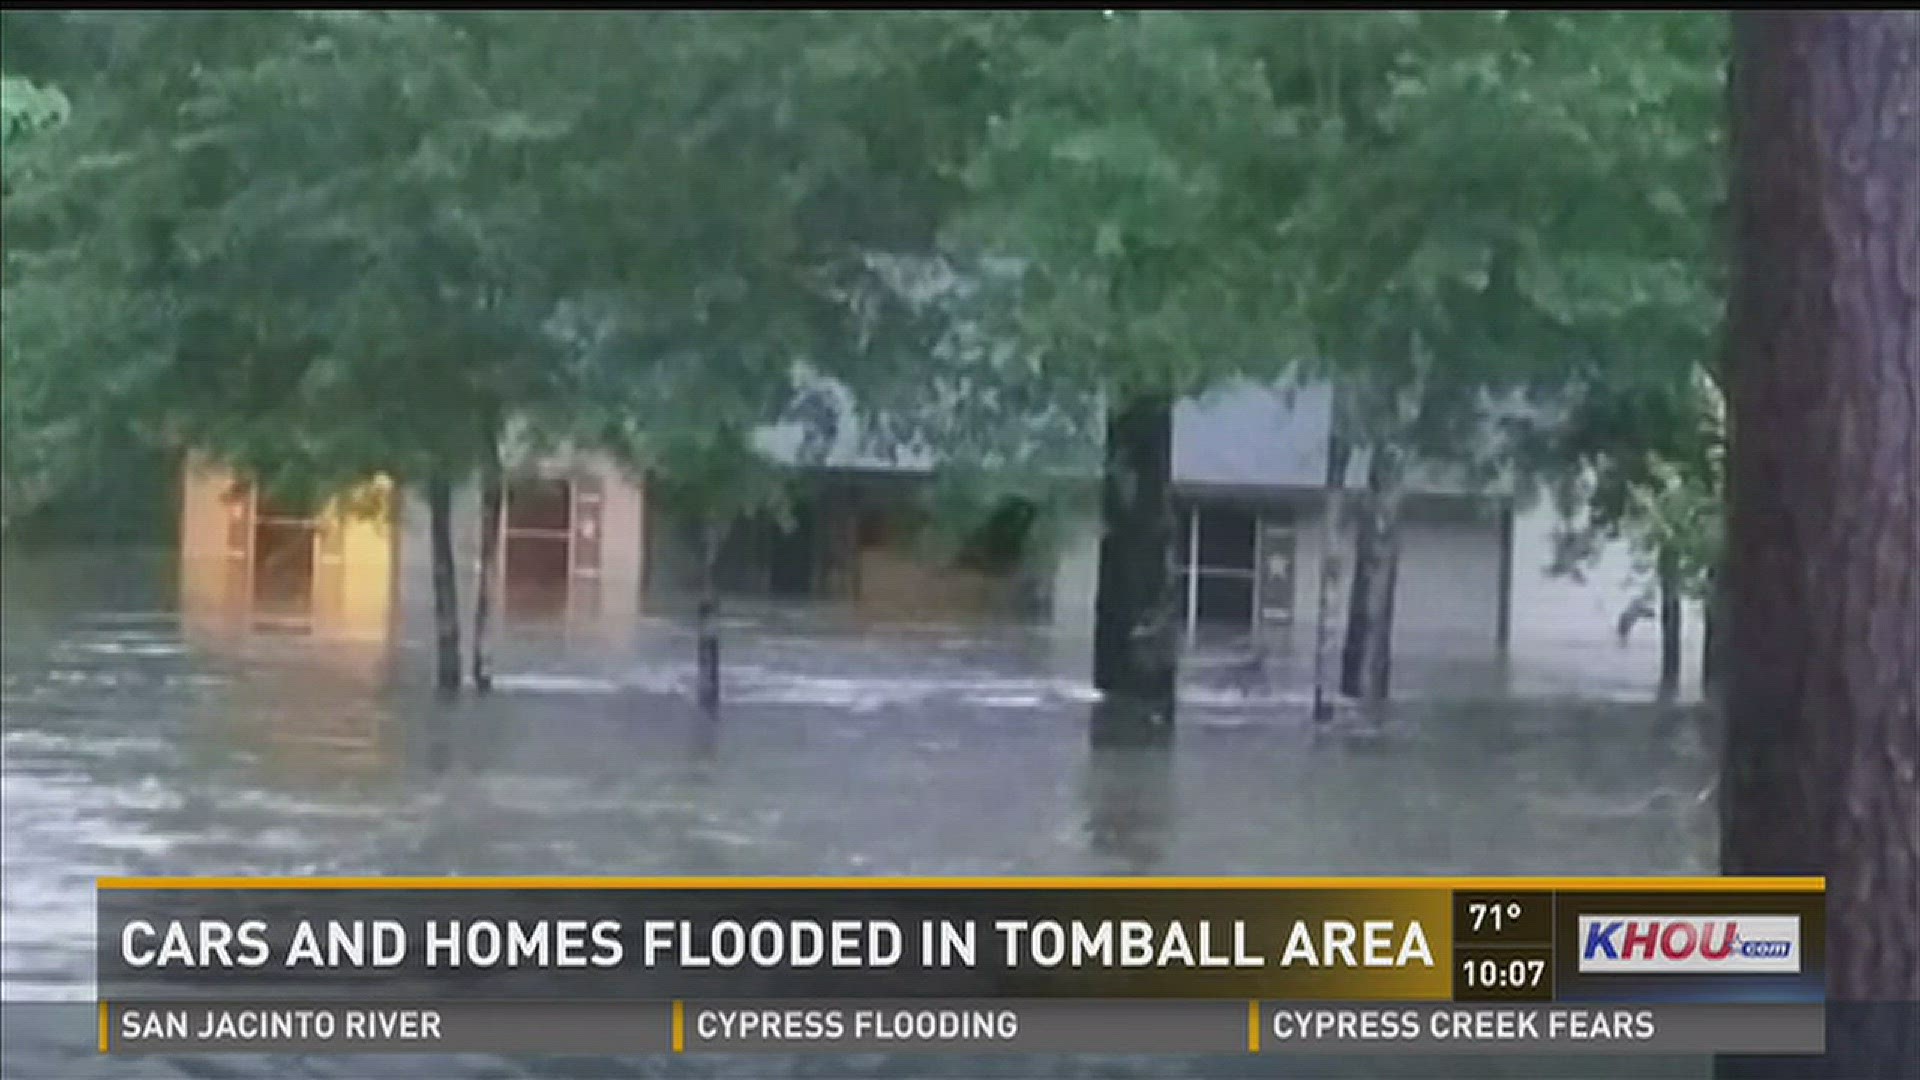 Cars and homes have been flooded in the Tomball area after Friday's storms. One driver was caught in high water and escaped from his vehicle just in time.